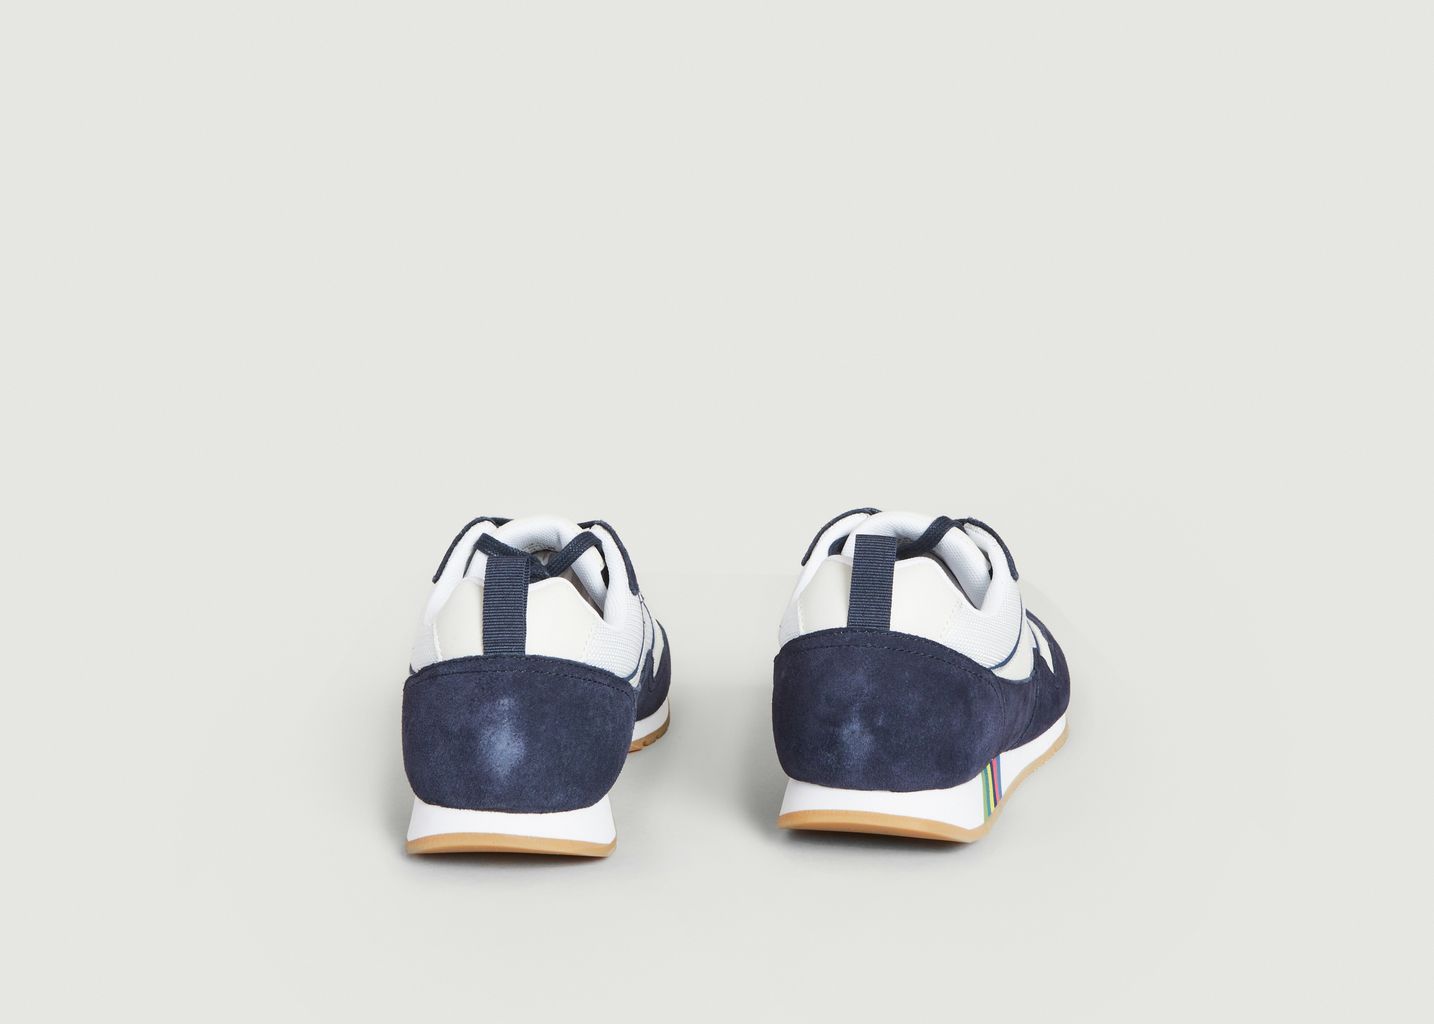 Will Sneakers - PS by PAUL SMITH